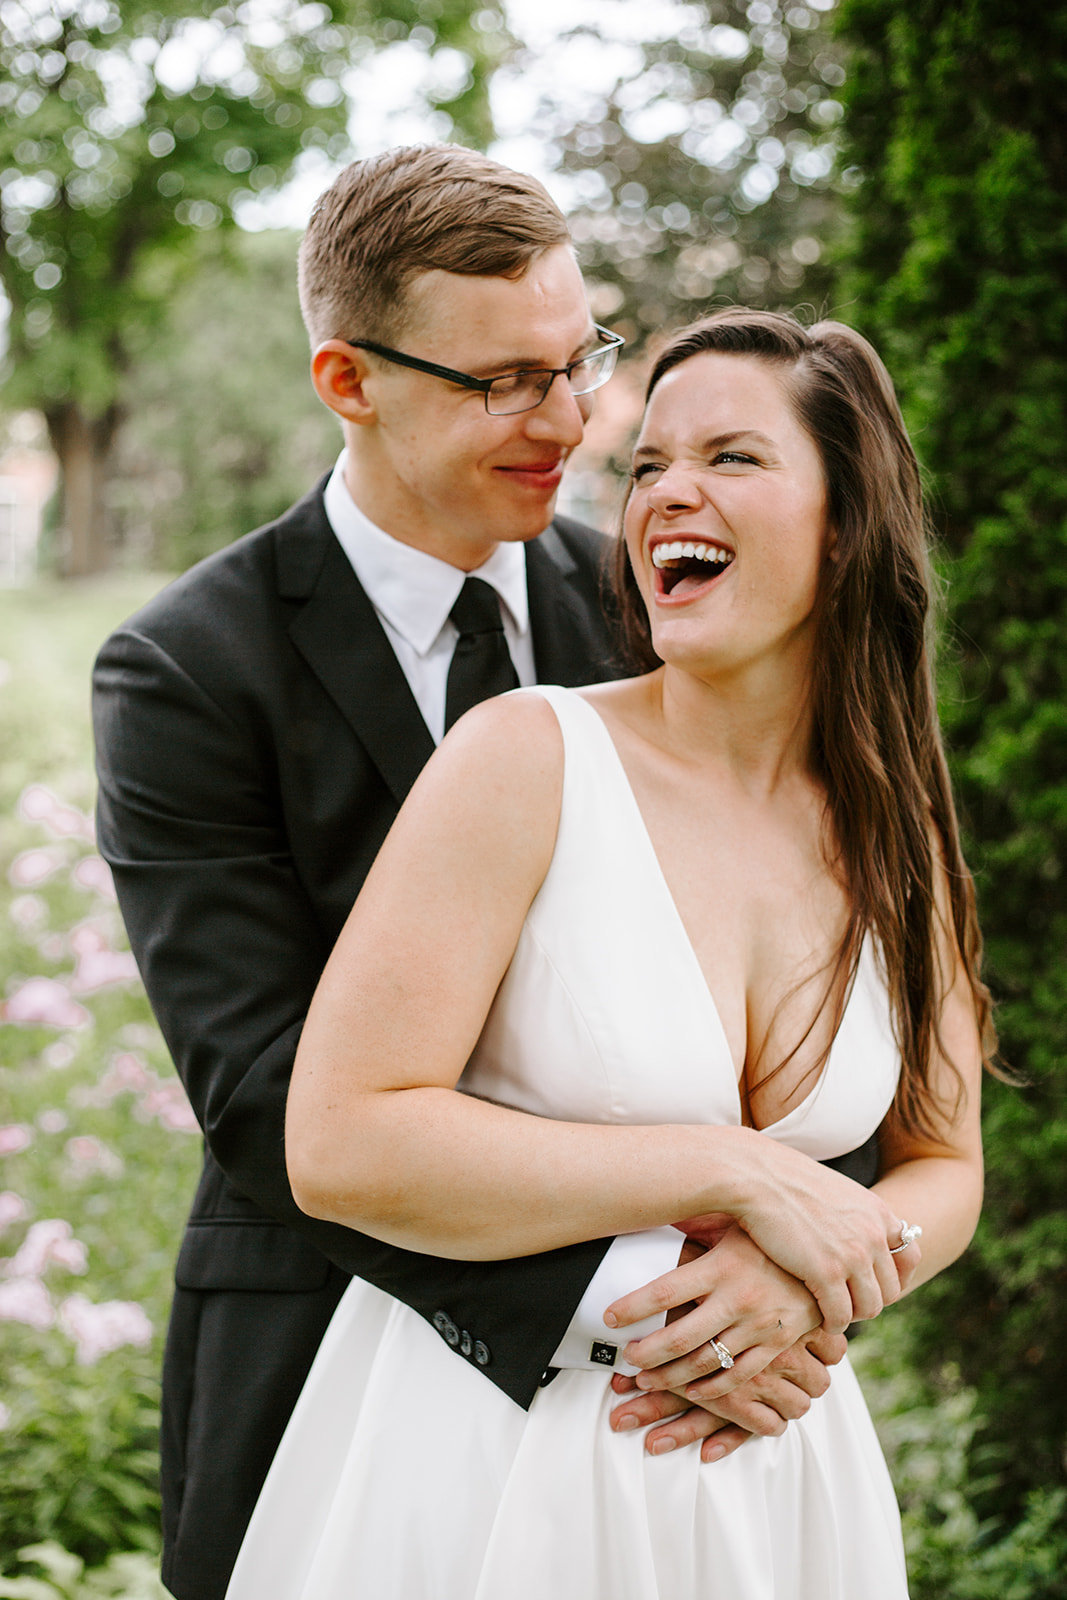 Bride and groom smiling and laughing at each other during their Minneapolis wedding day